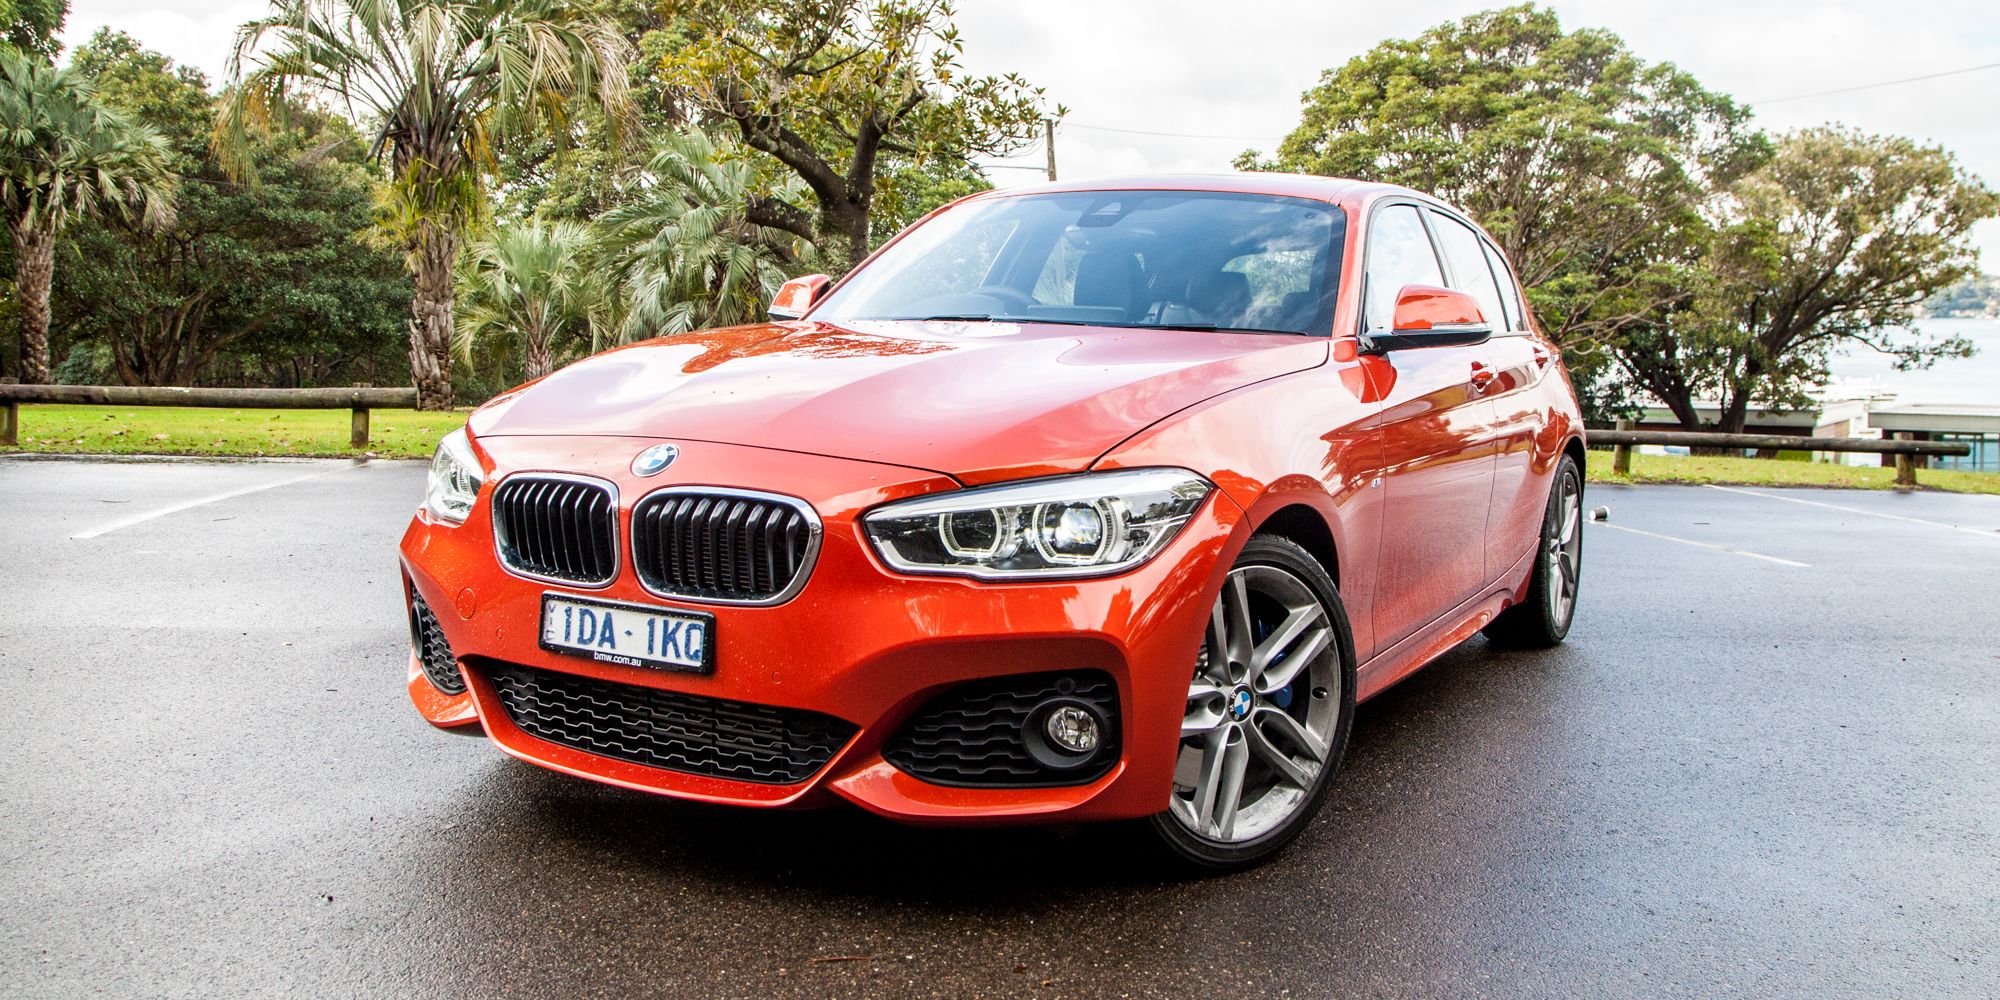 2015 Bmw 125i Preview (View 1 of 15)